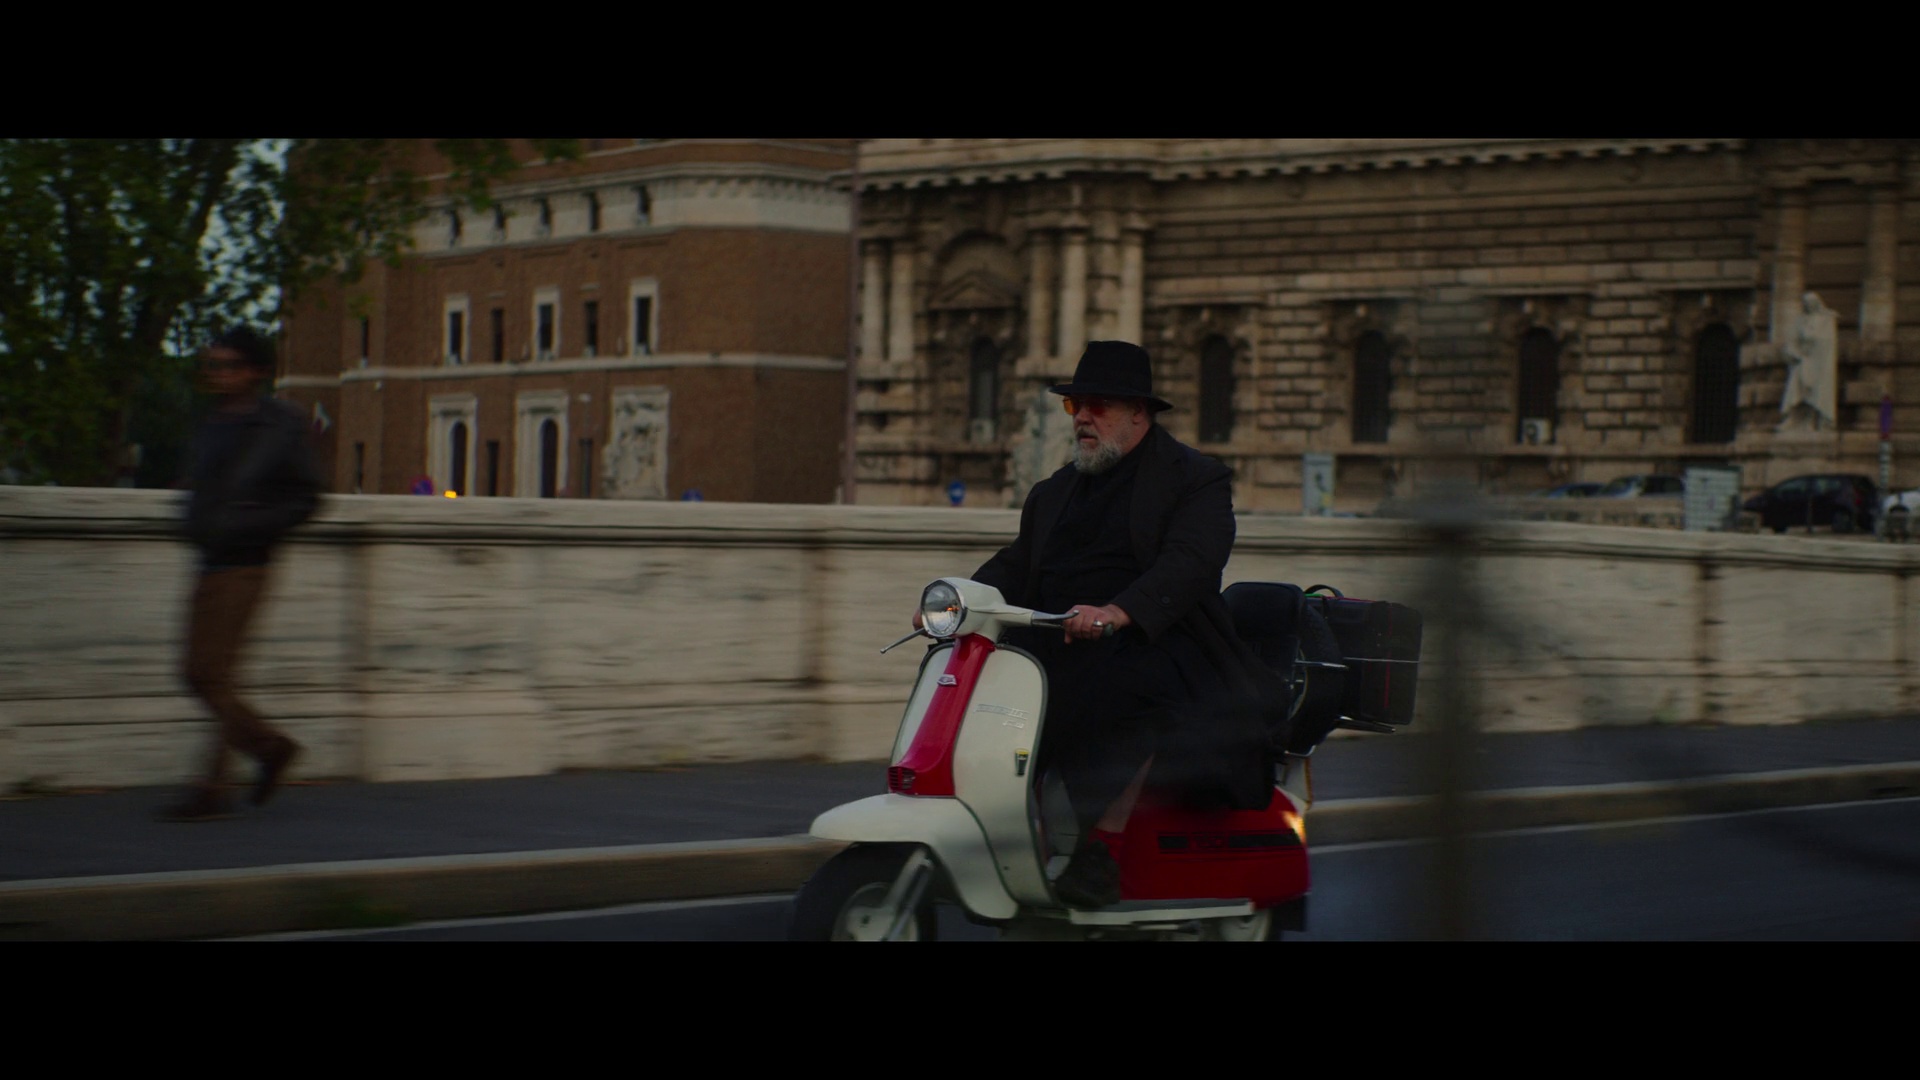 The Lambretta Scooter Side in the Movie “The Pope’s Exorcist”